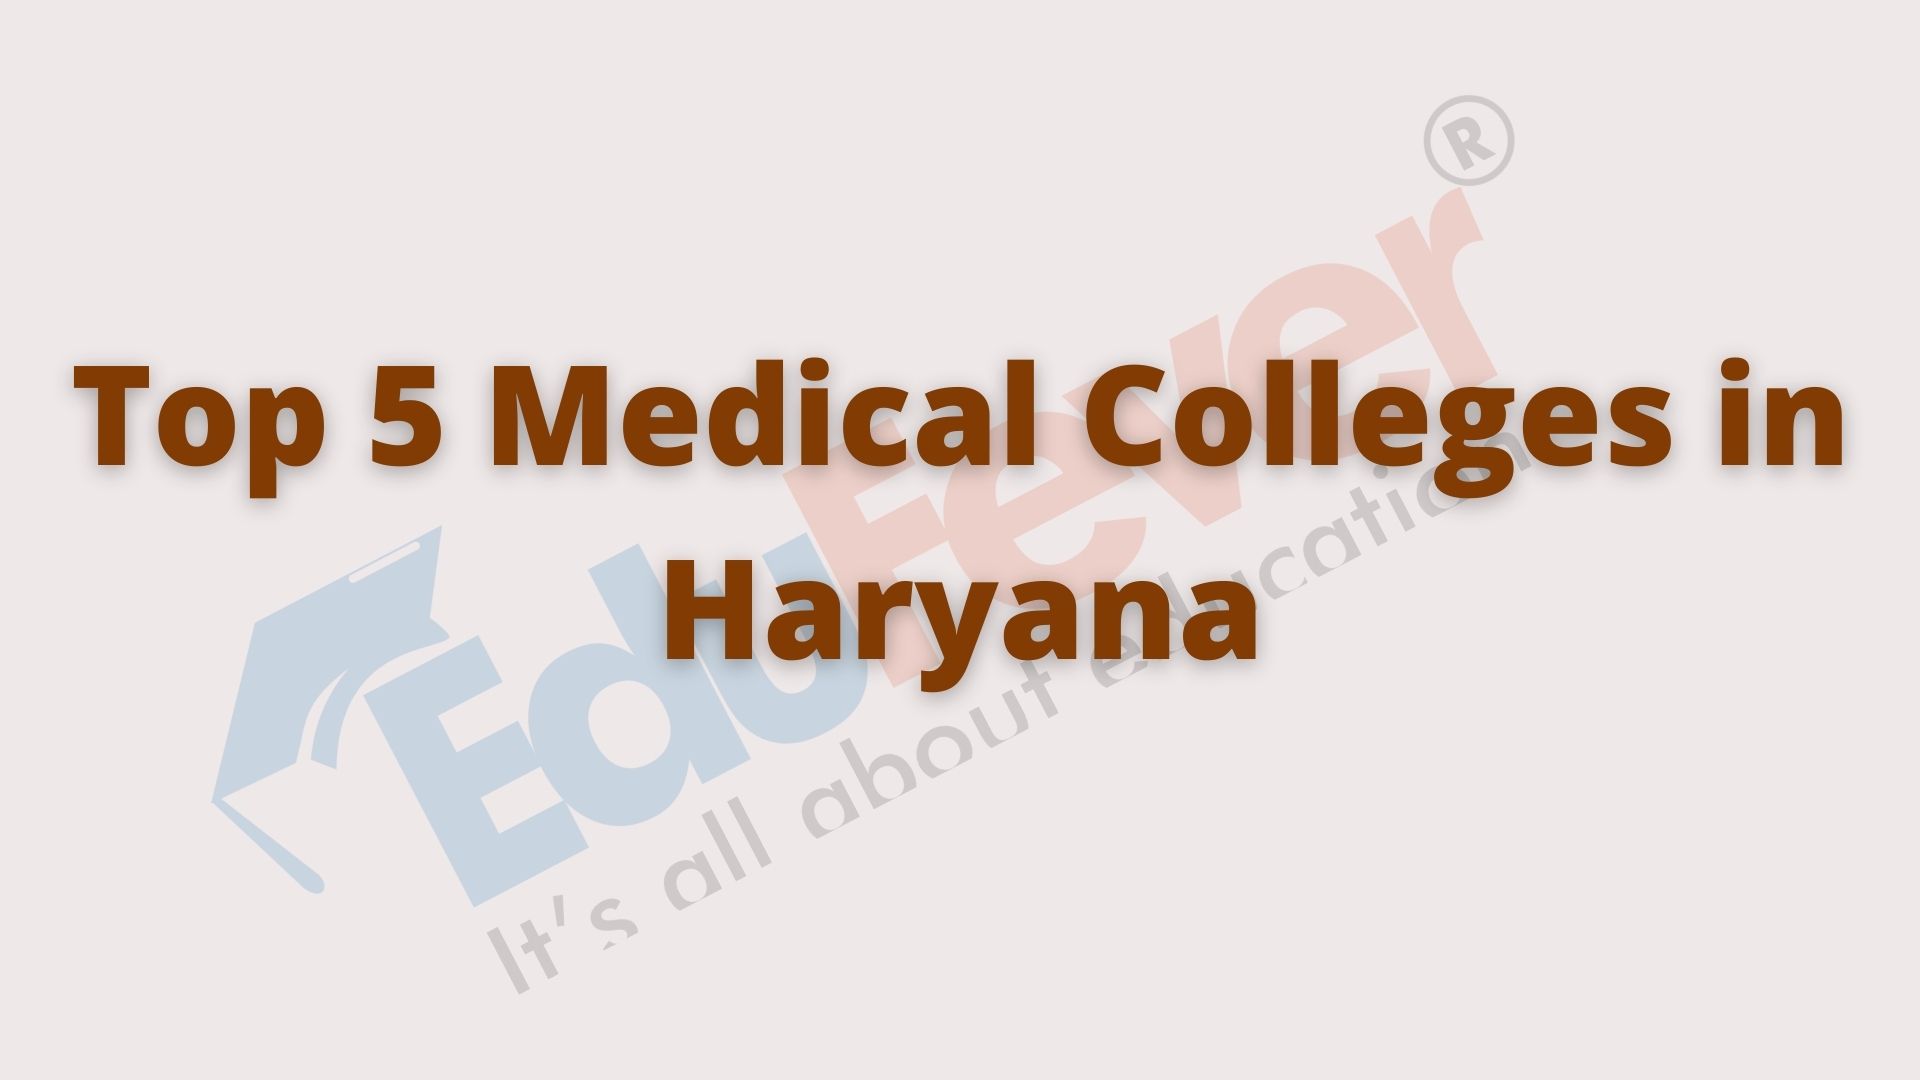 Top 5 Medical Colleges in Haryana